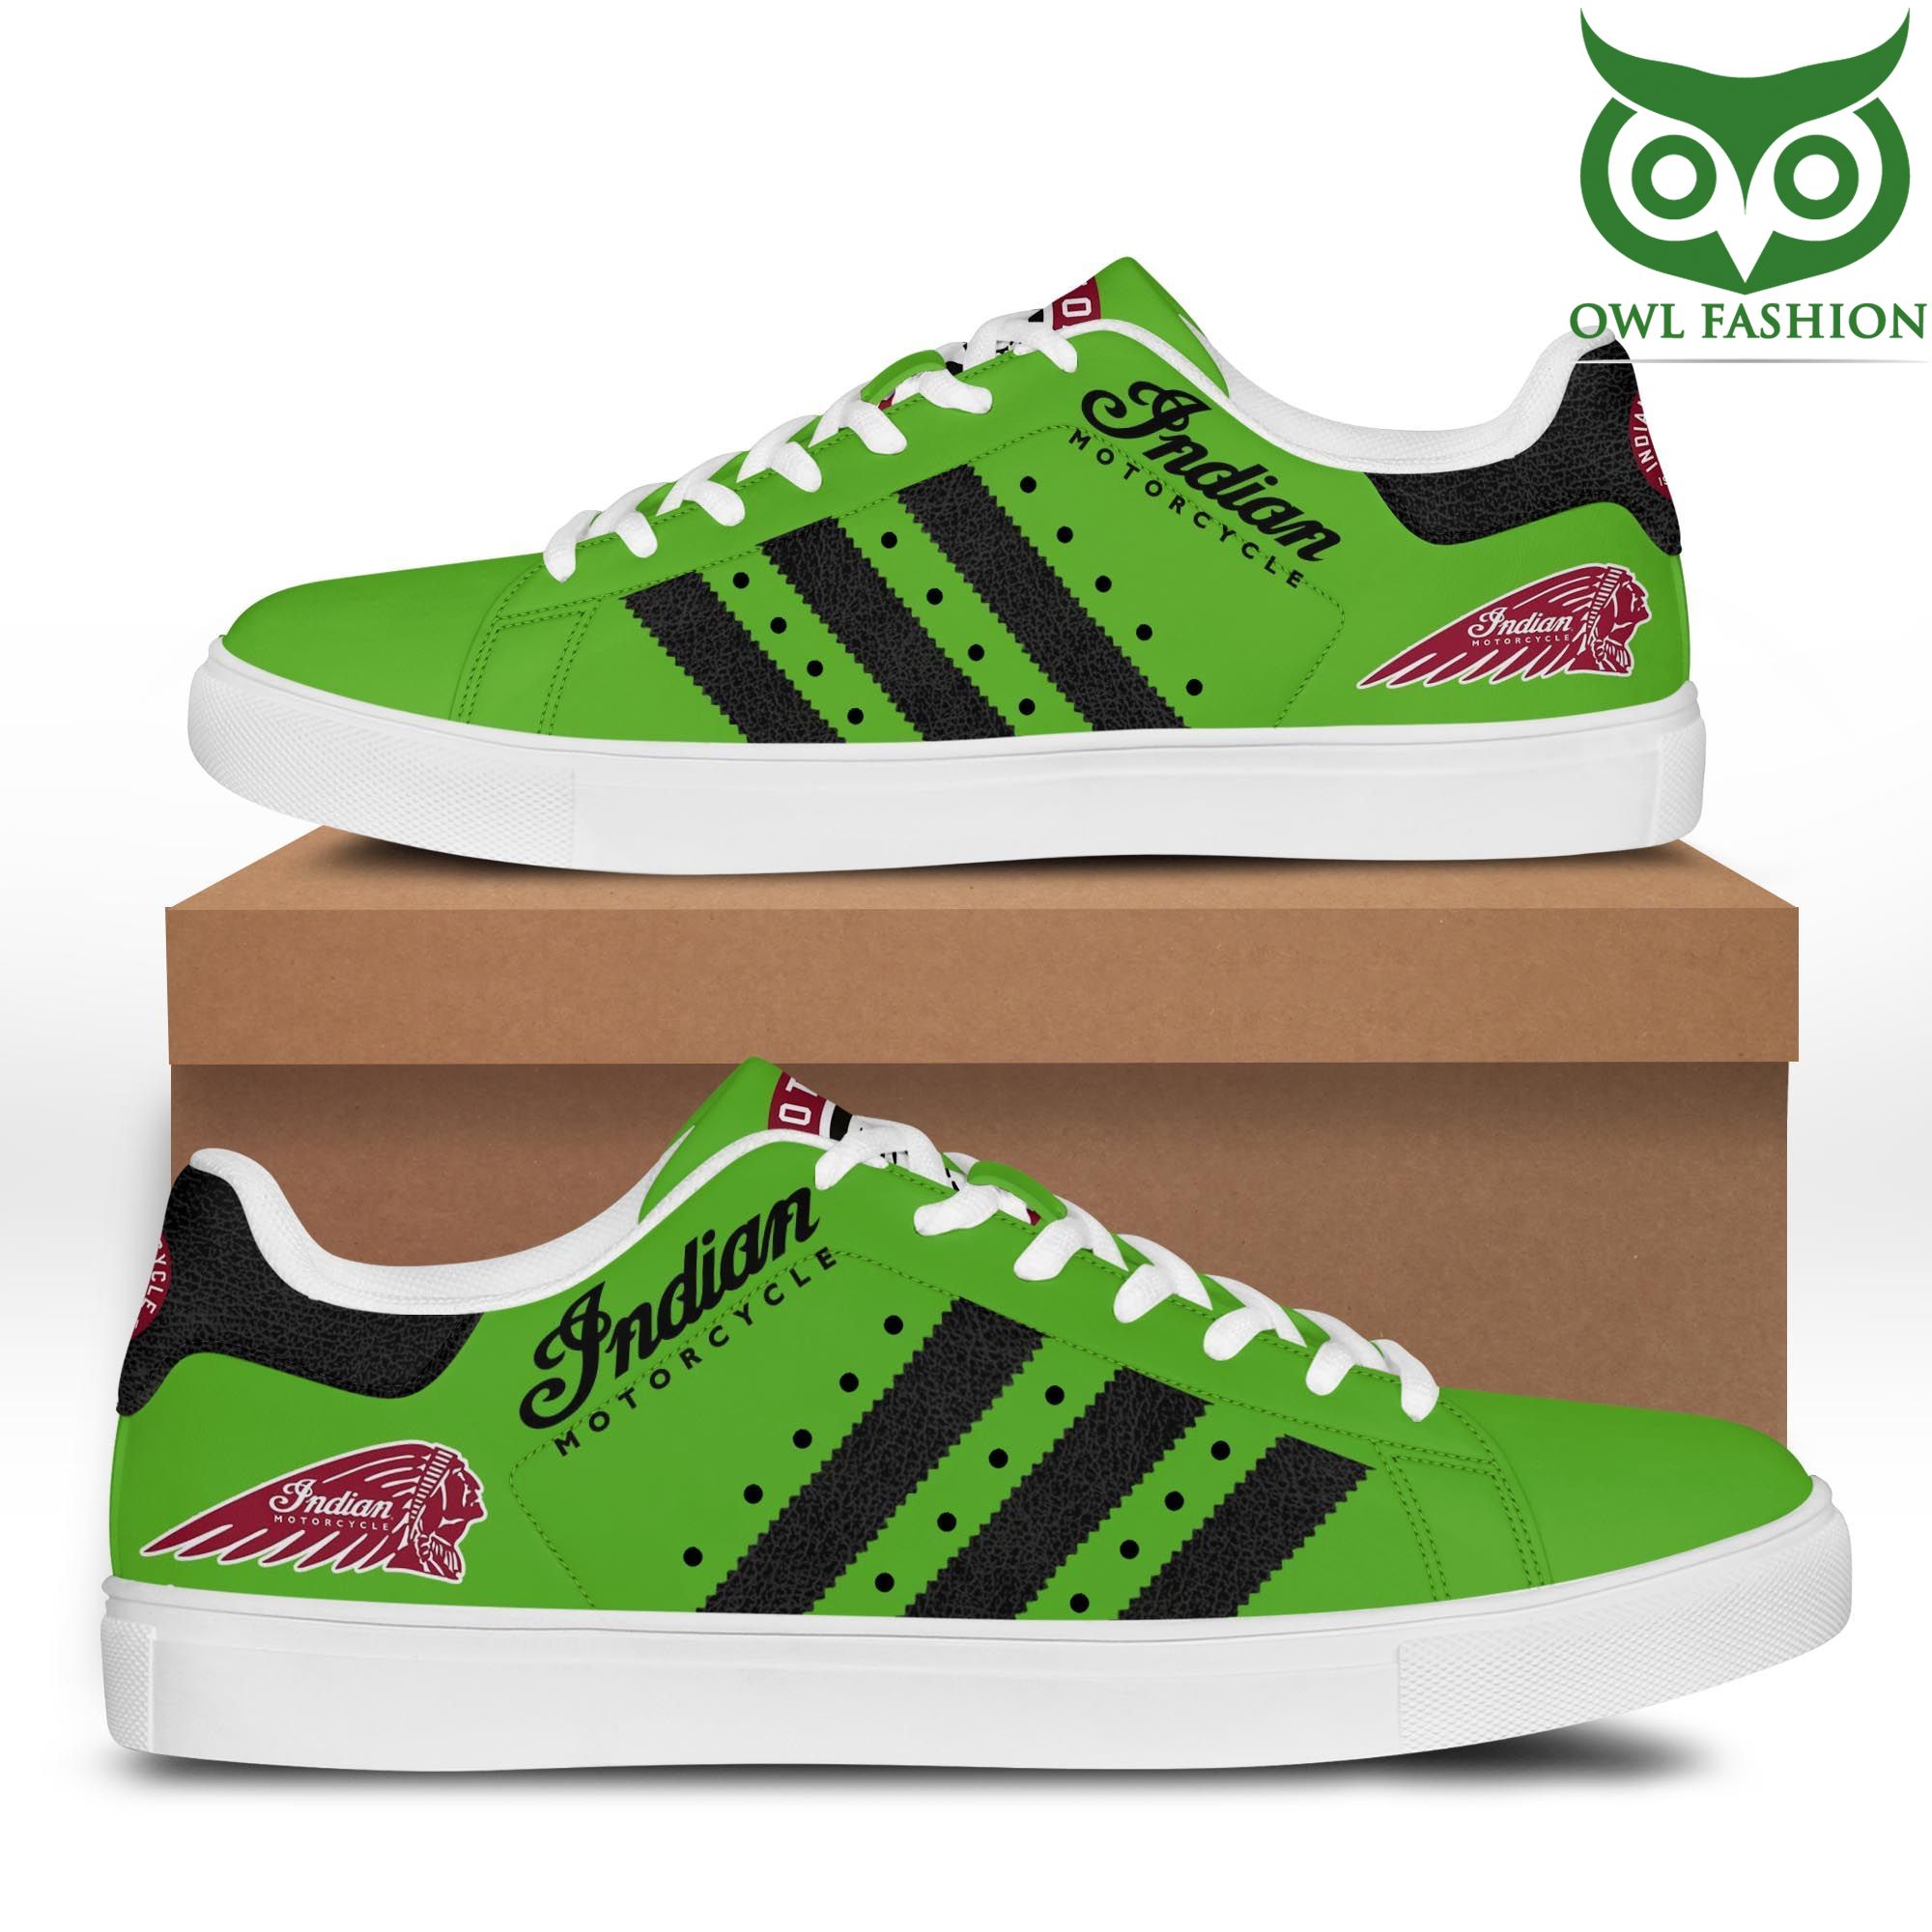 82 Indian Motorcycle Stan Smith Shoes Sneaker Green version